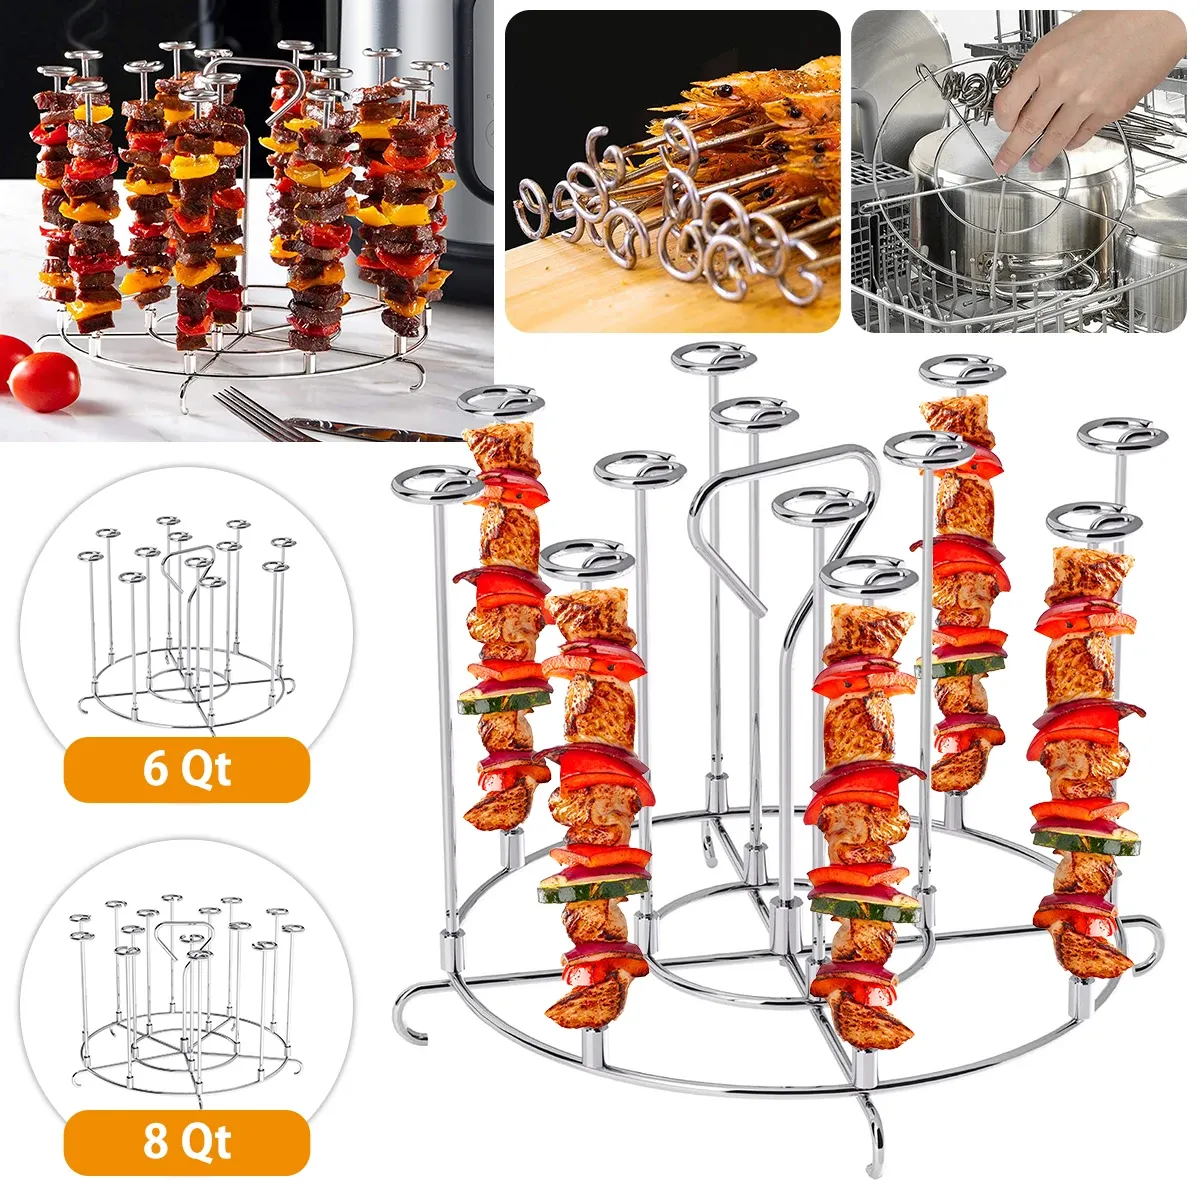 Kits 6qt 8qt Air Fryer Skewer Stand Compatible with Ninja Foodie Vertical Skewers Holder Grilling Air Fryer Kitchen Accessories